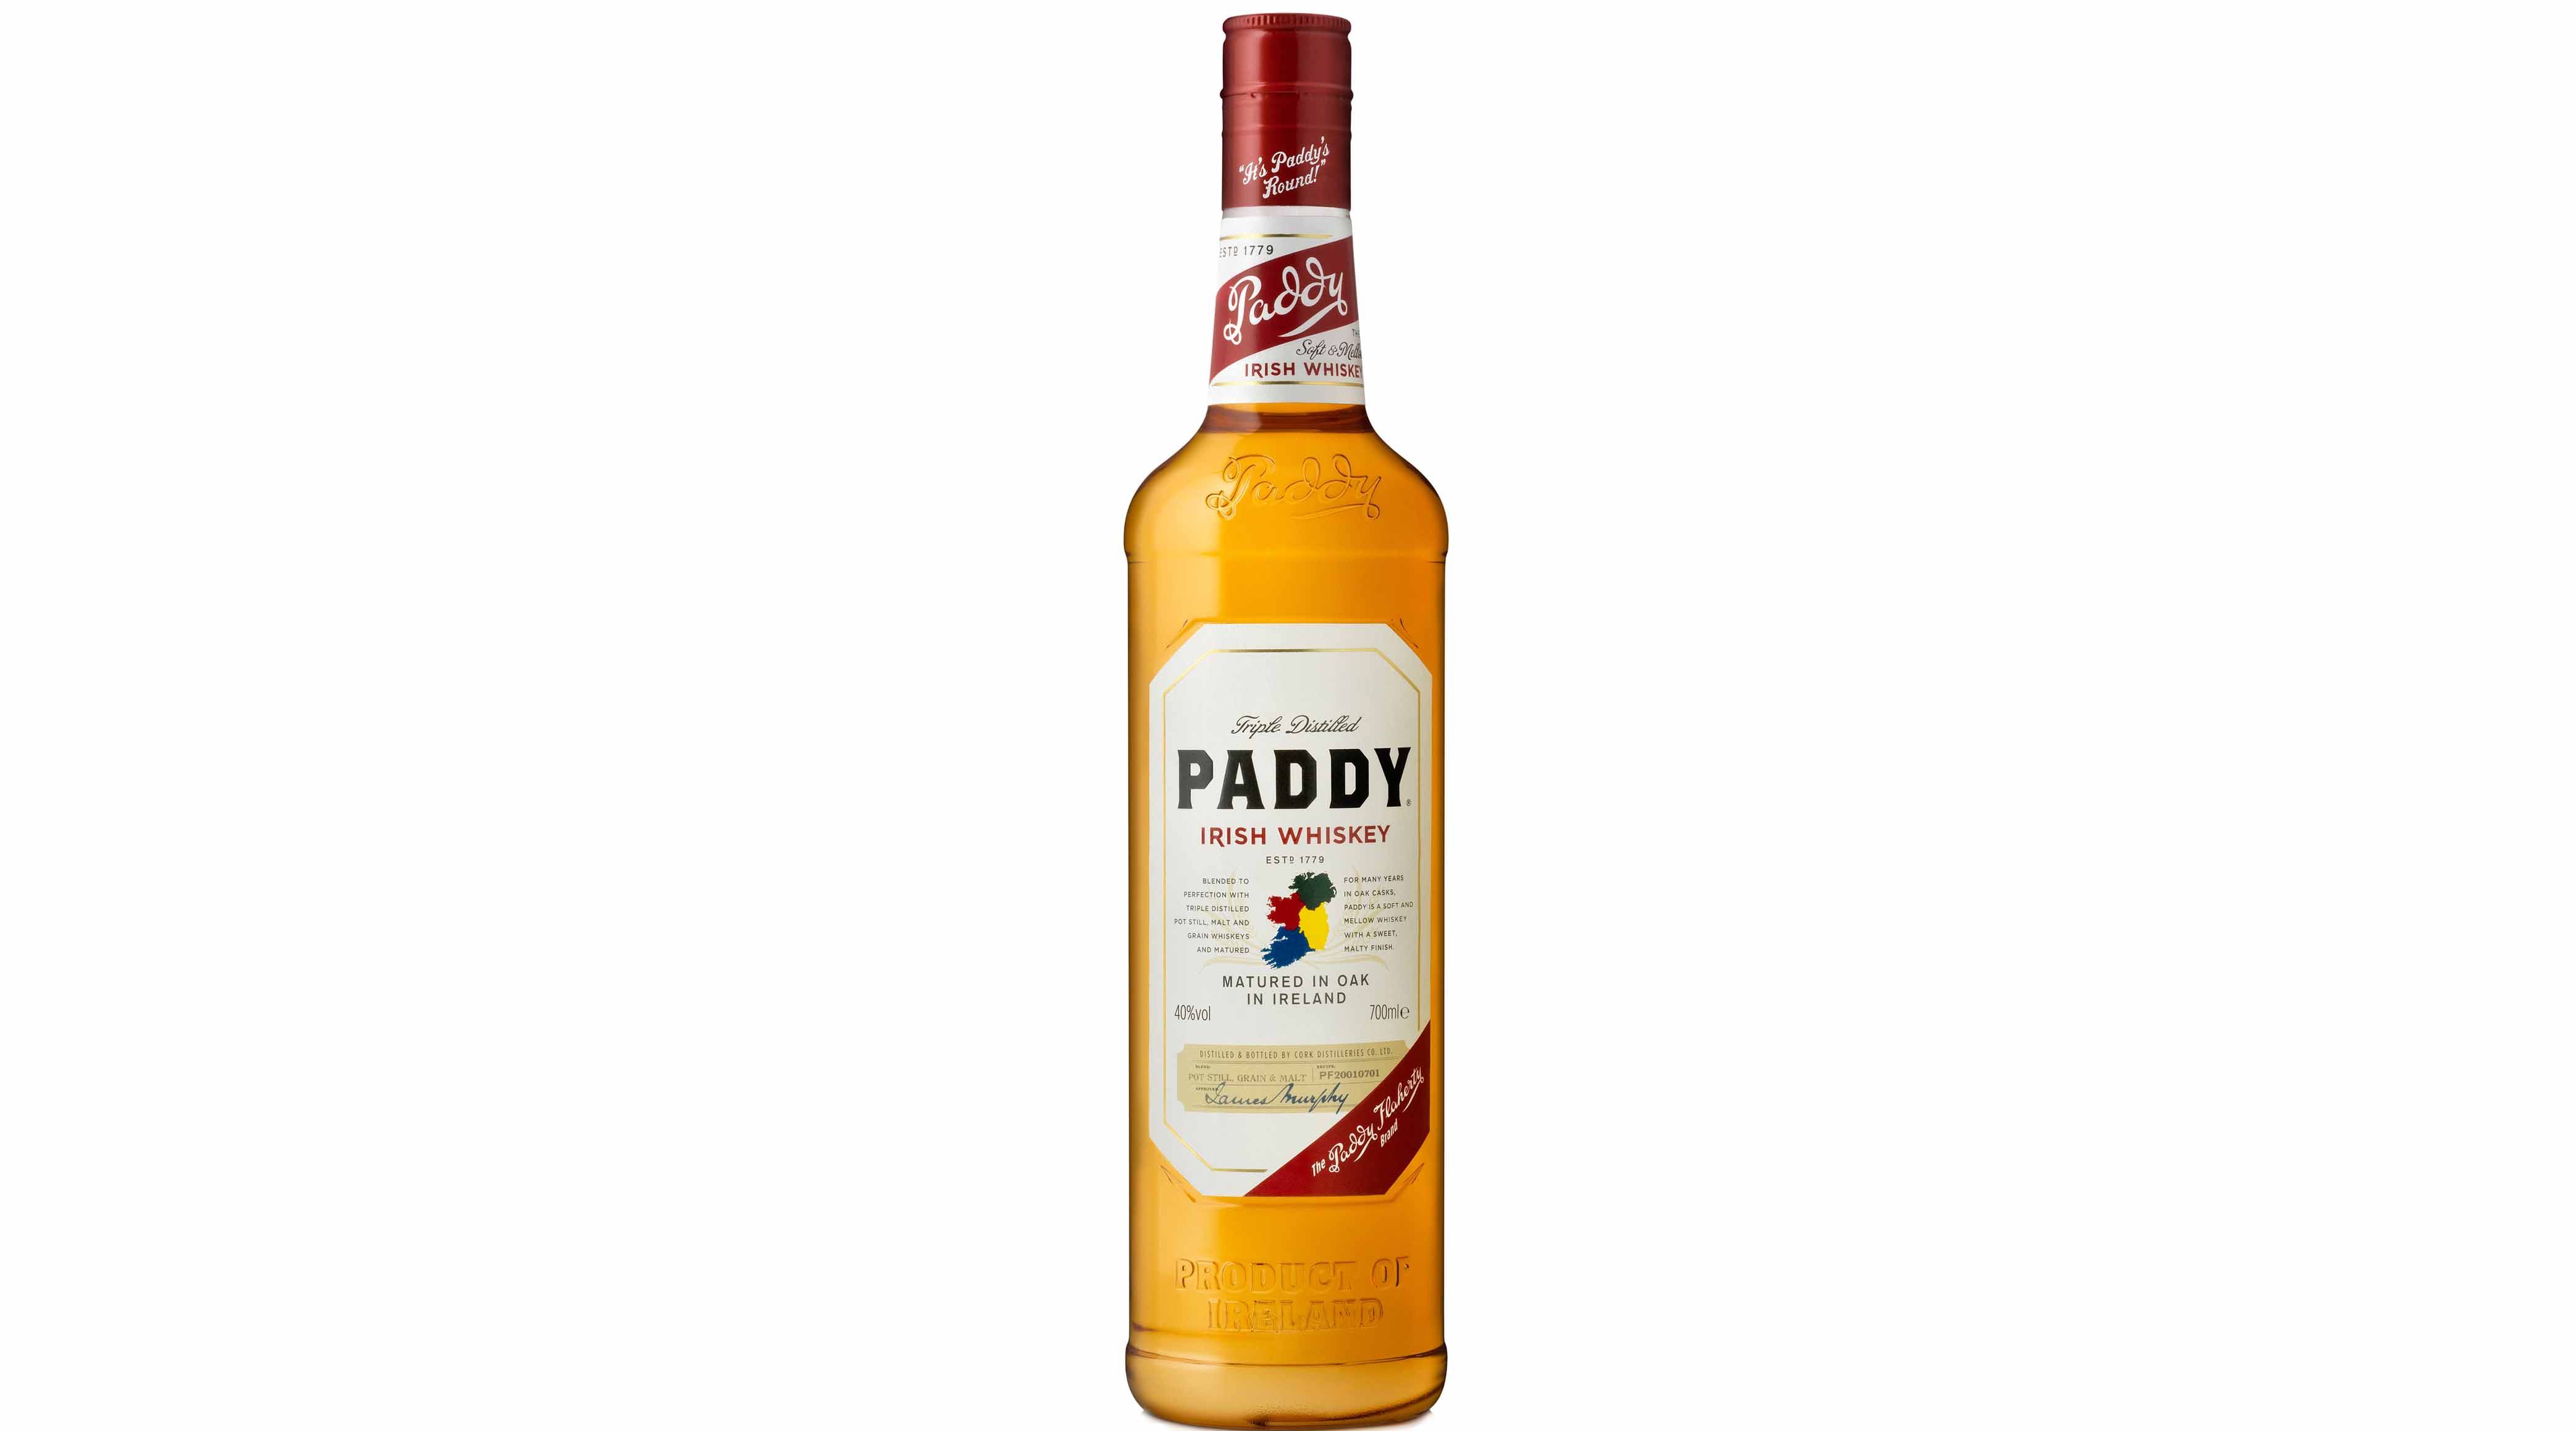 Dublin-based Hi-Spirits Ireland is a subsidiary of the US-based Sazerac Company which acquired Paddy in 2016.